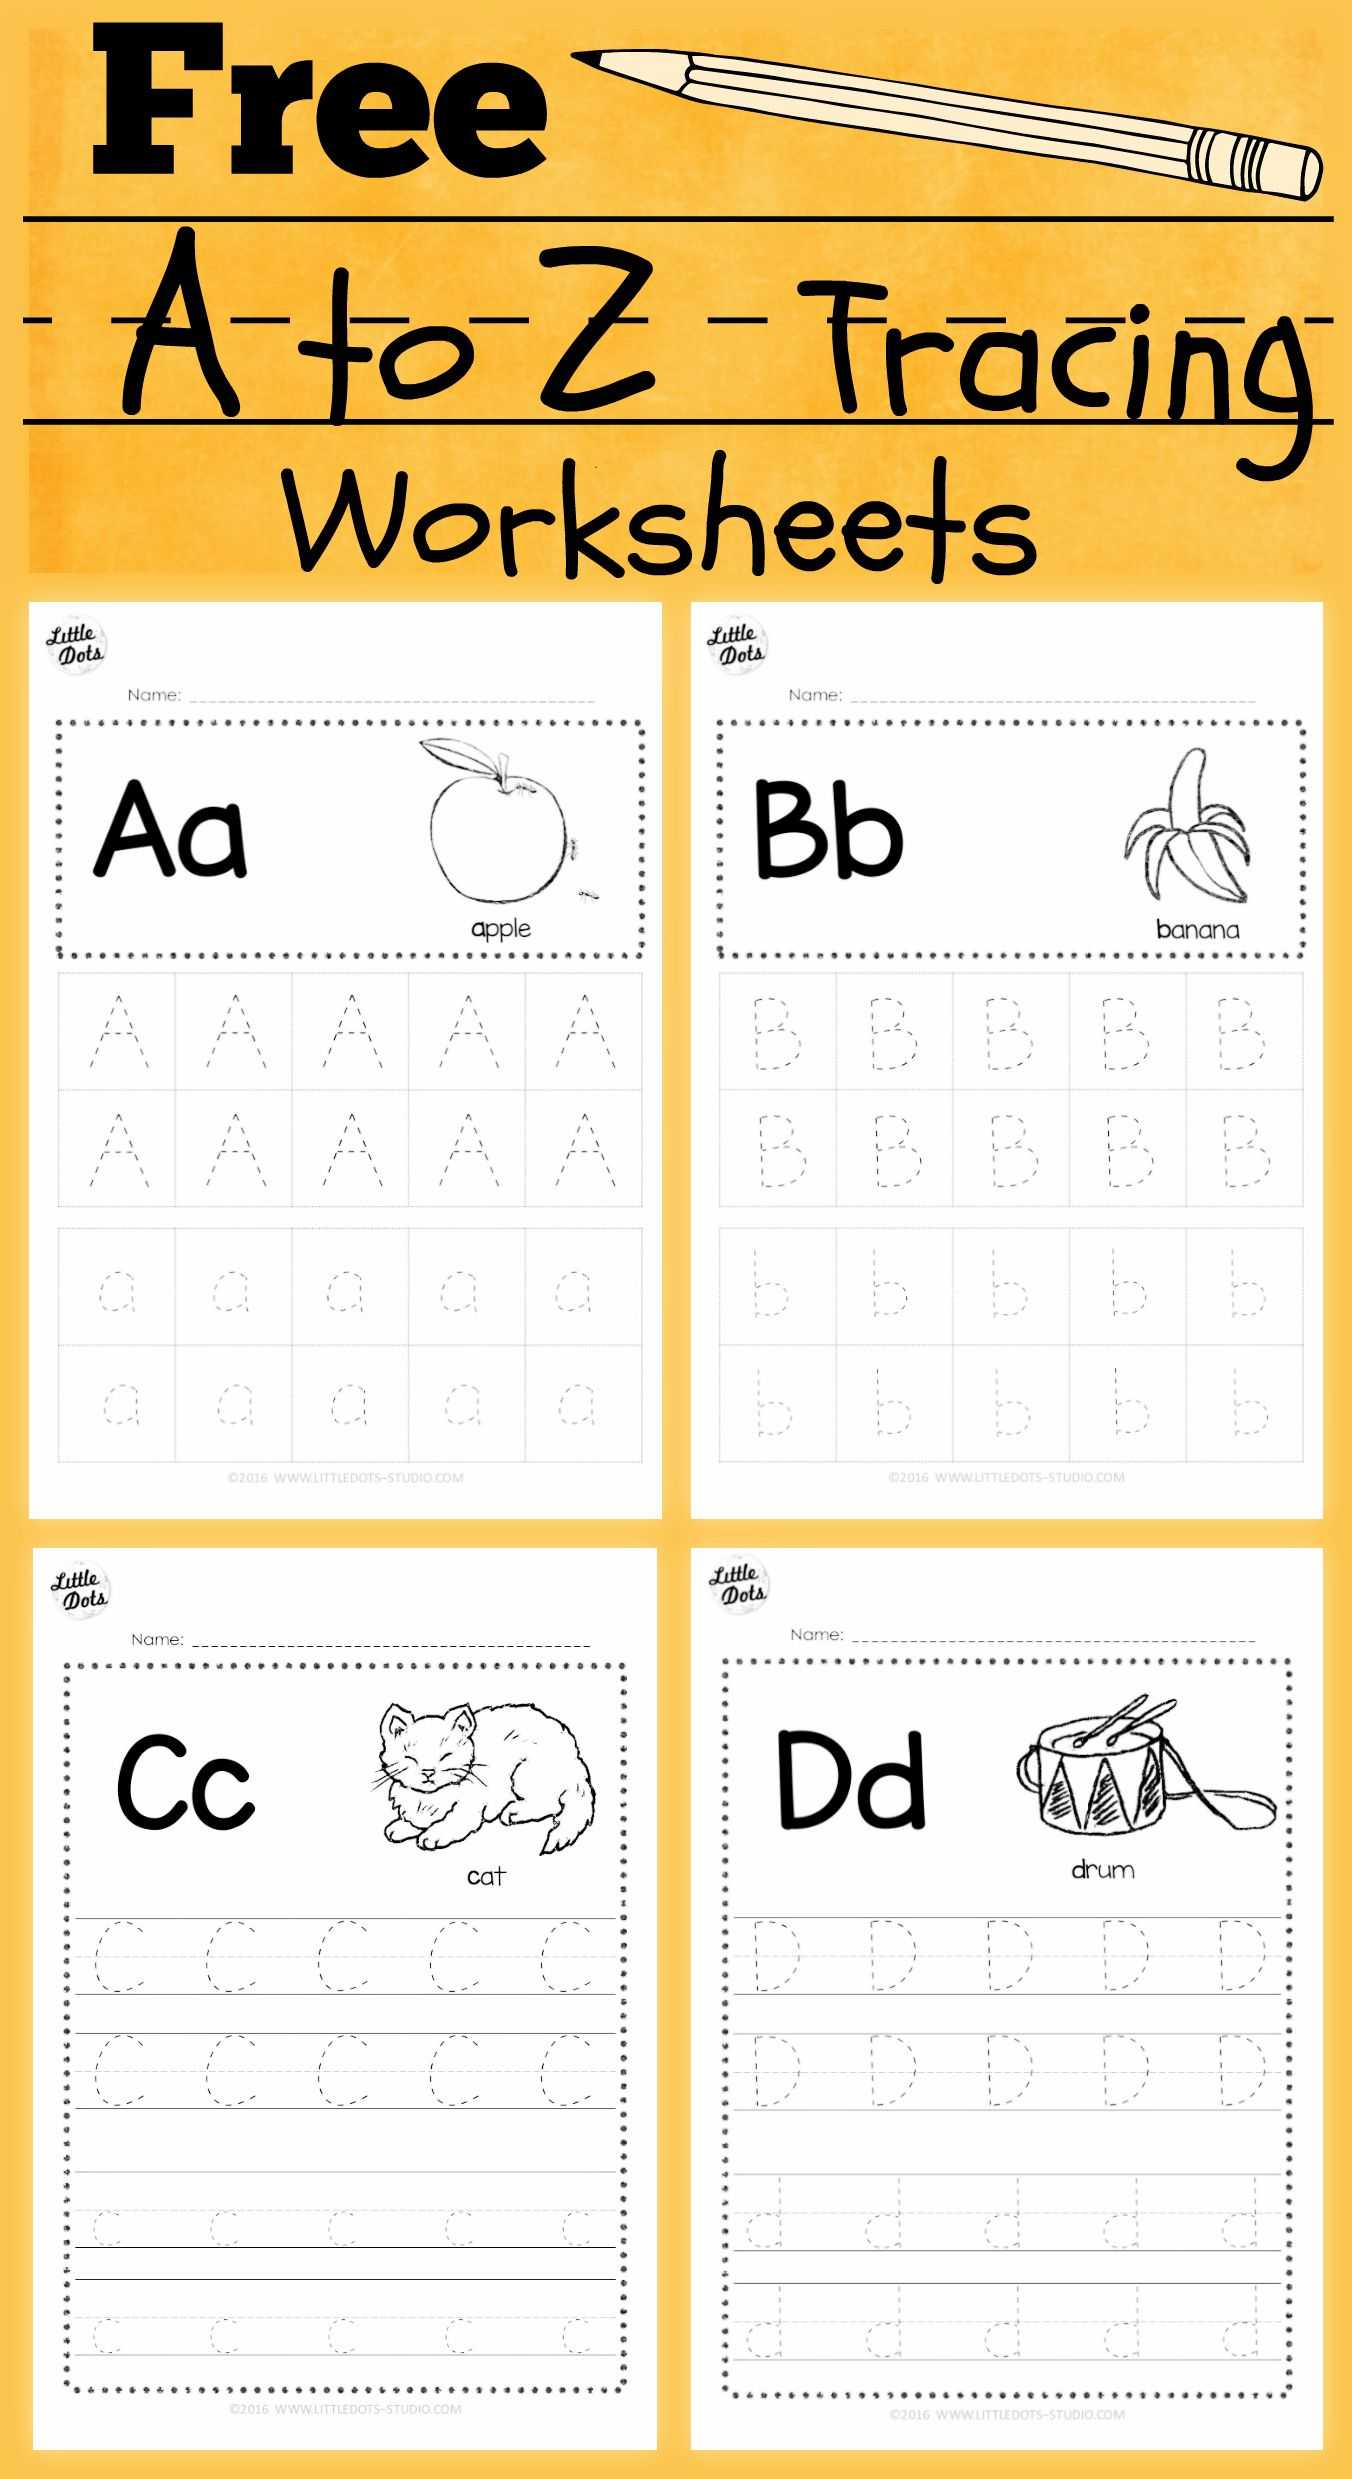 Preschool Name Tracing Worksheets Also Download Free Alphabet Tracing Worksheets for Letter A to Z Suitable